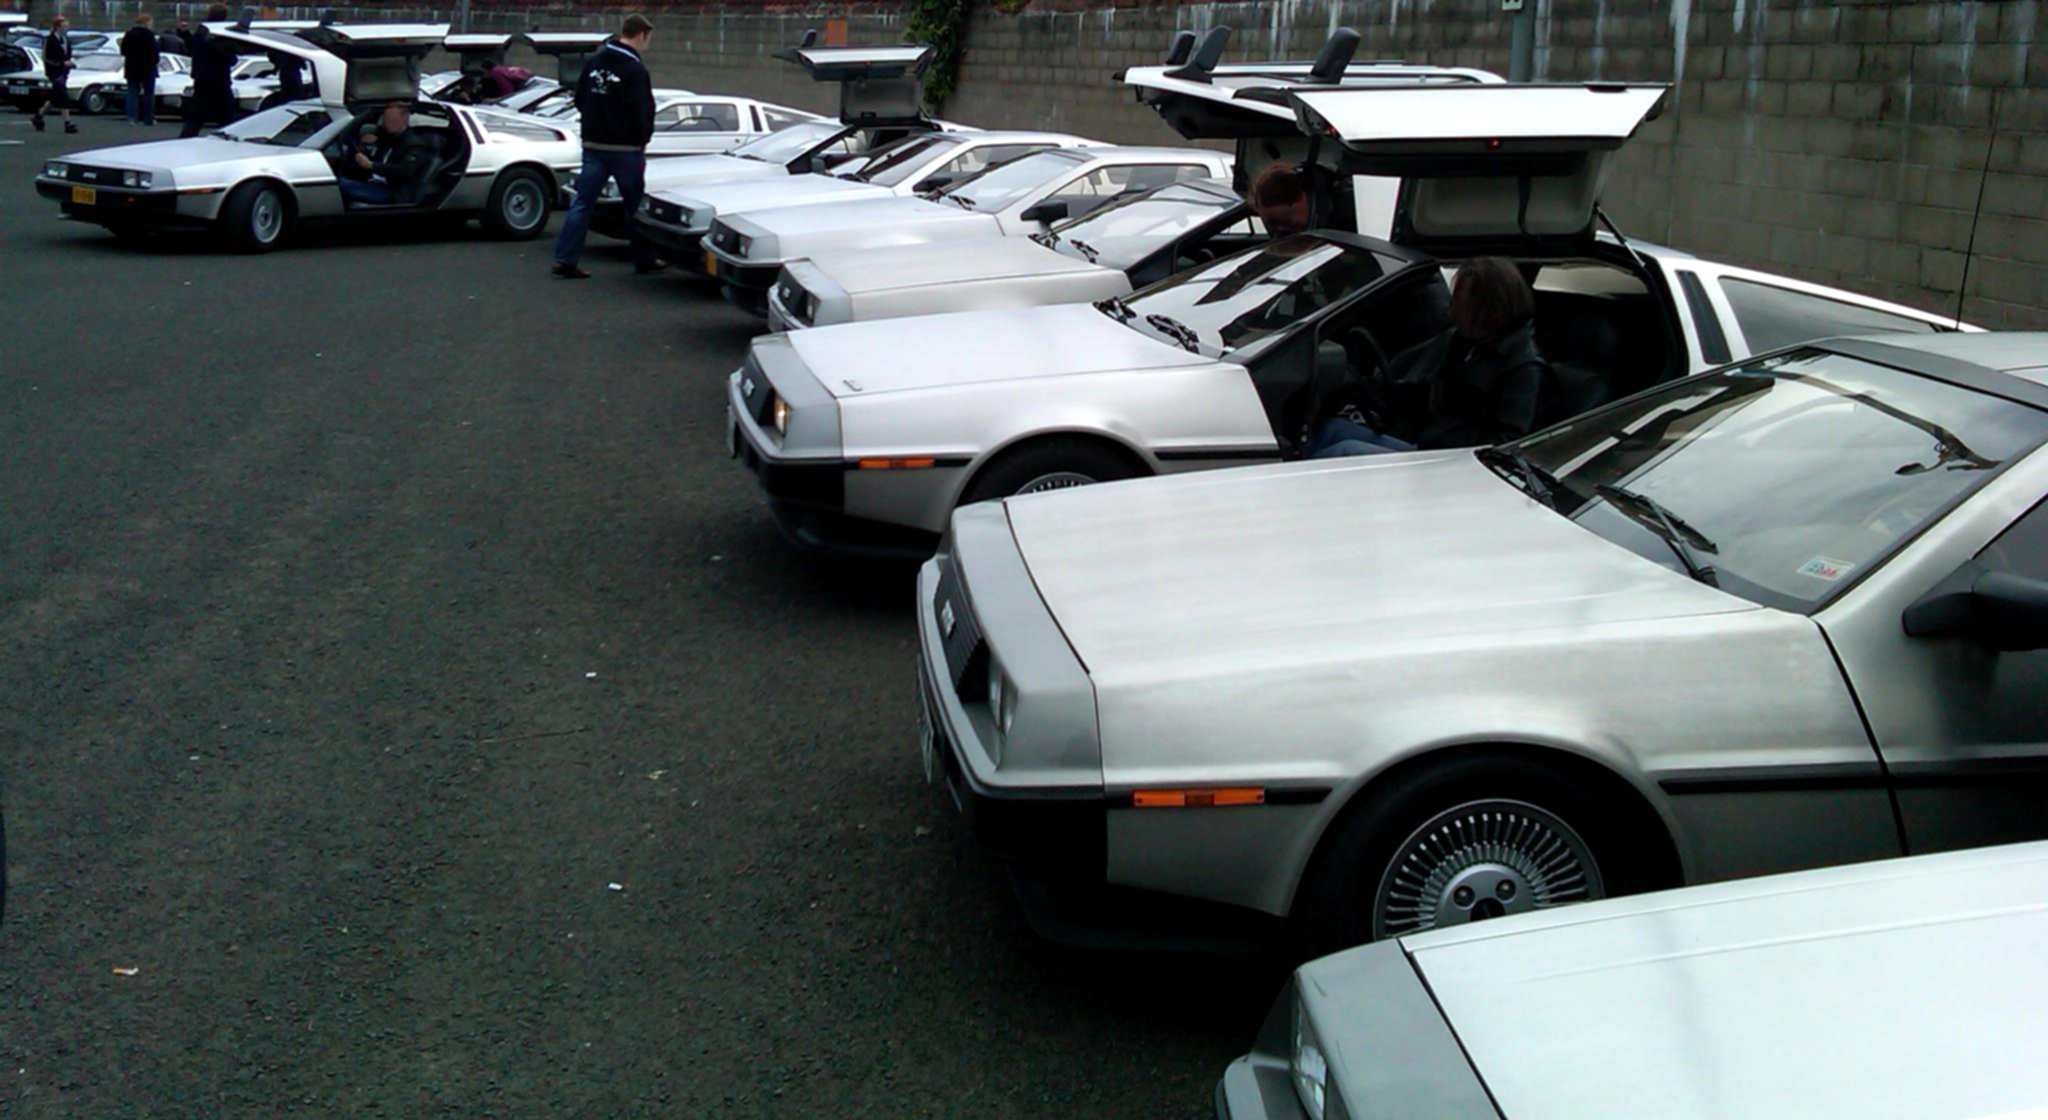 Many DeLoeans parked on display at a car show.